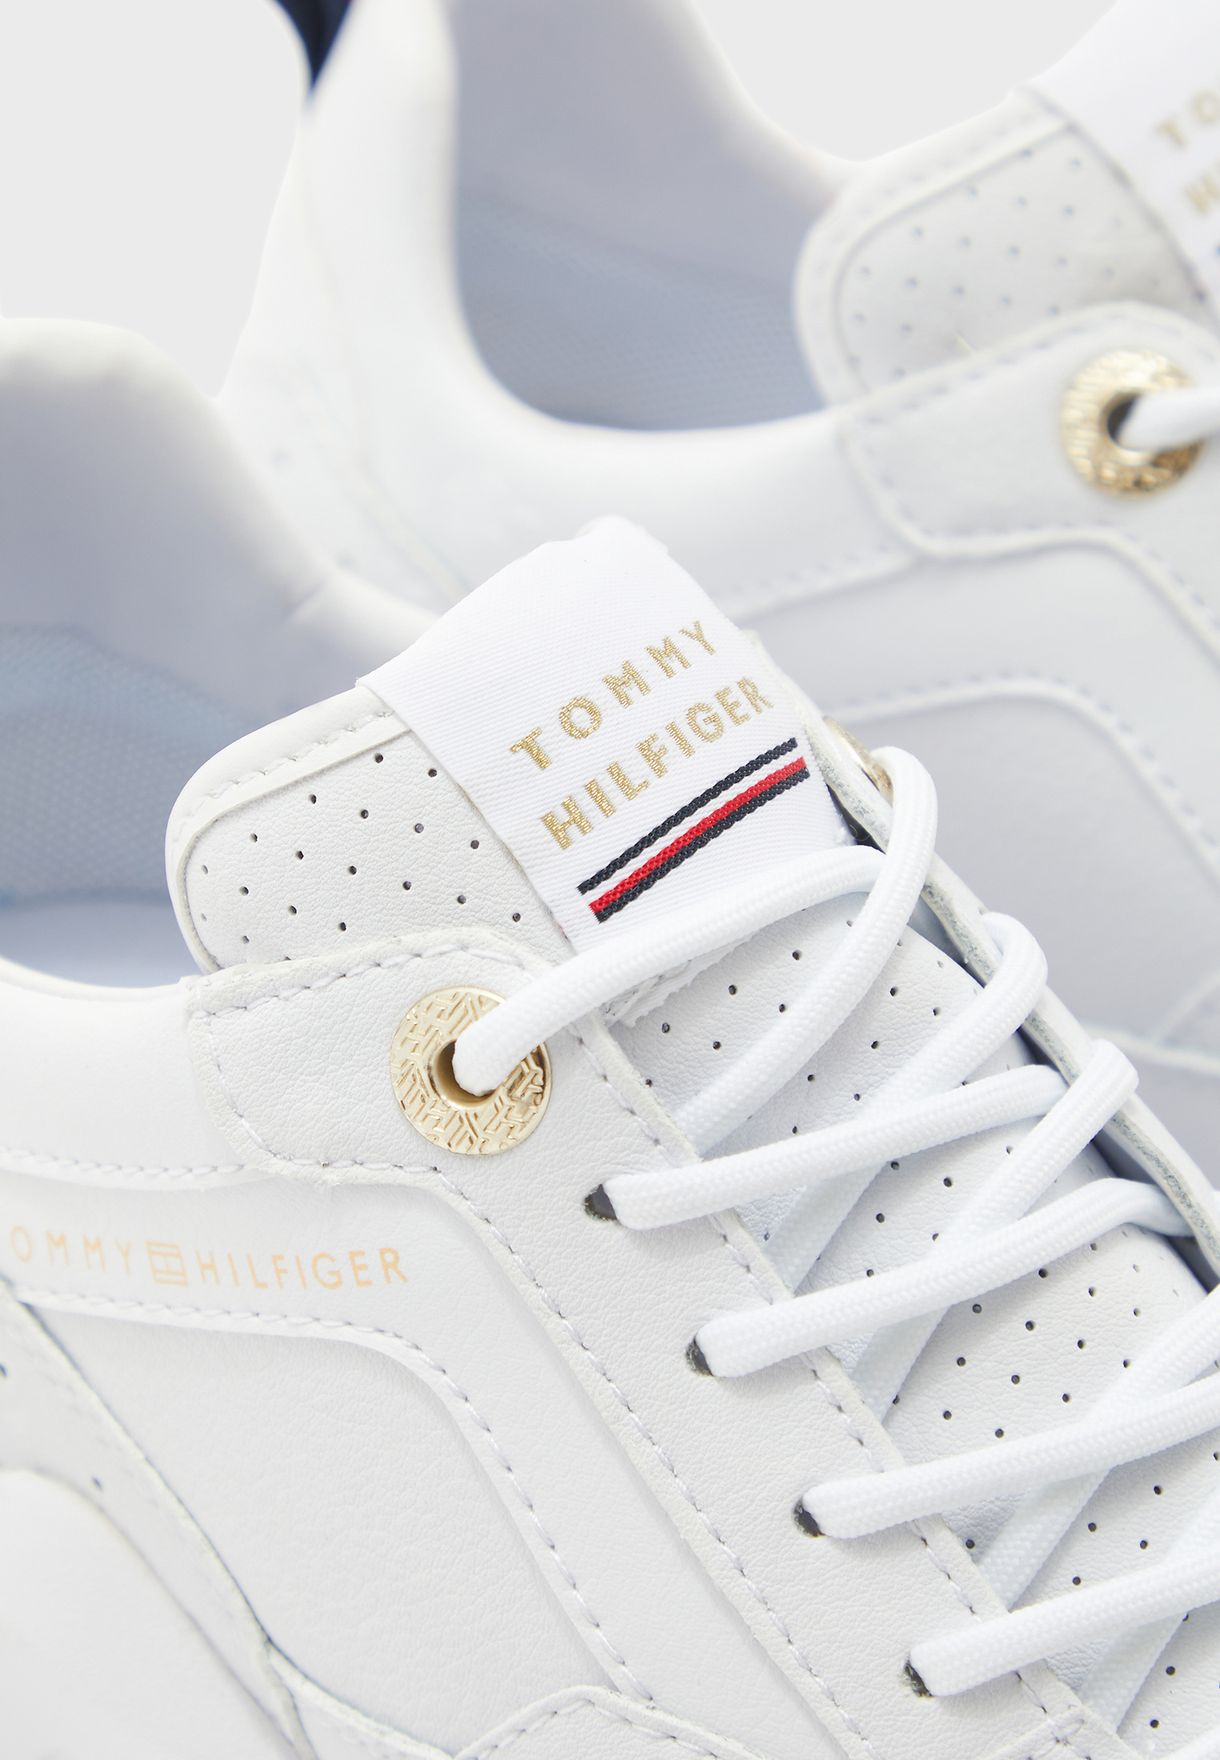 tommy hilfiger white wedge casual sneaker trainers